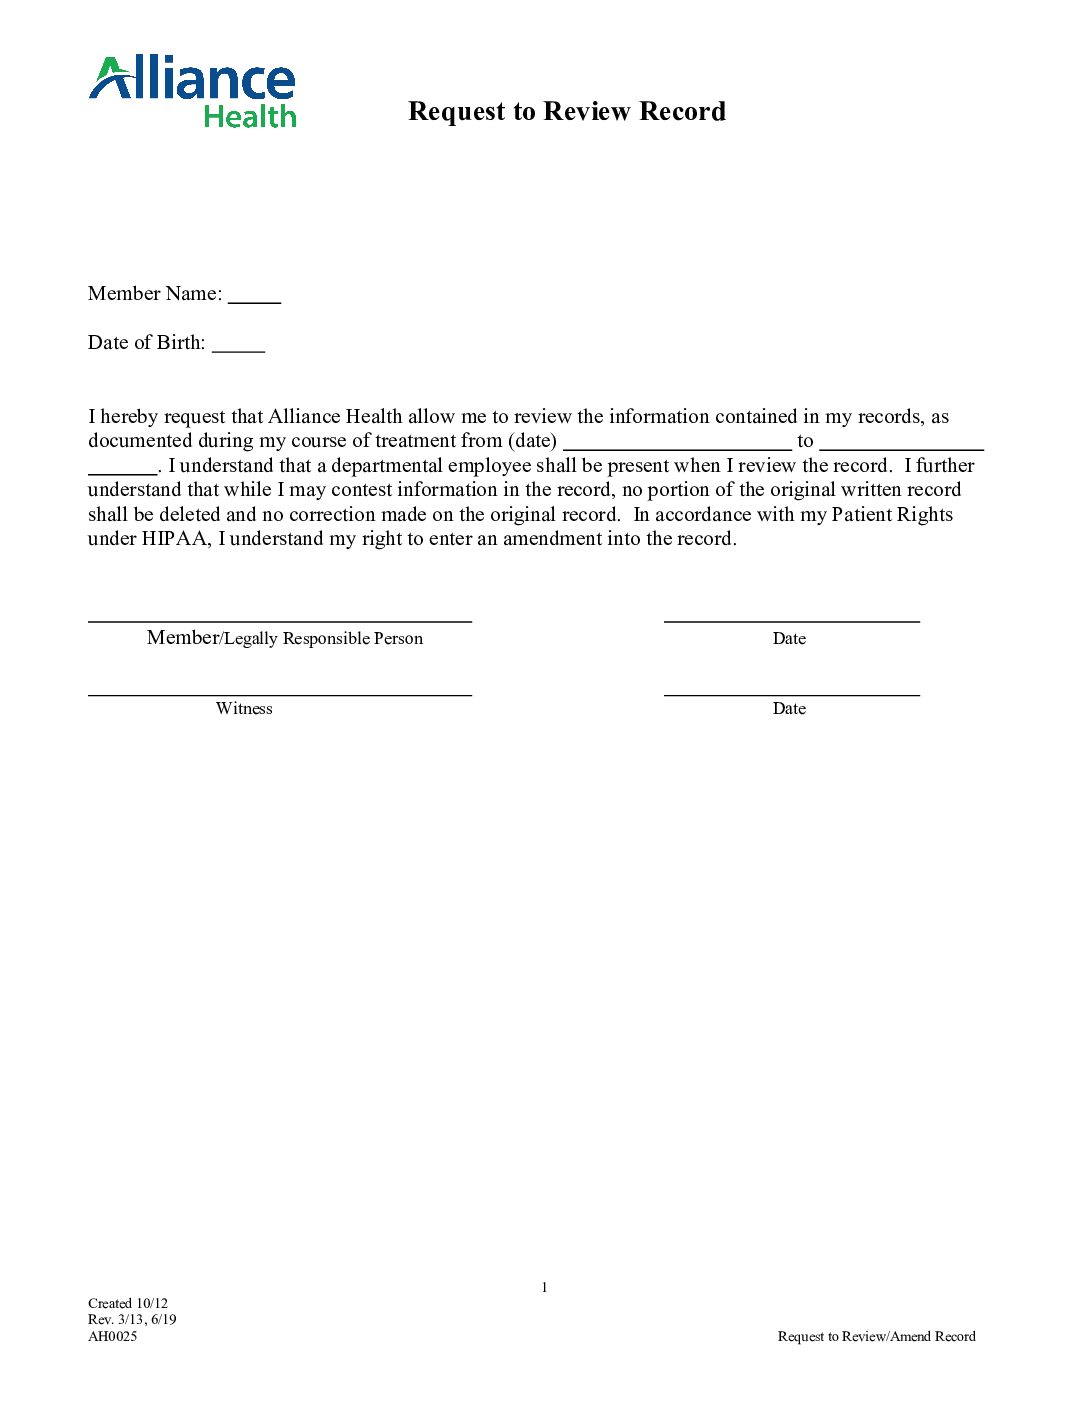 HIPAA Request to Review-Amend Record